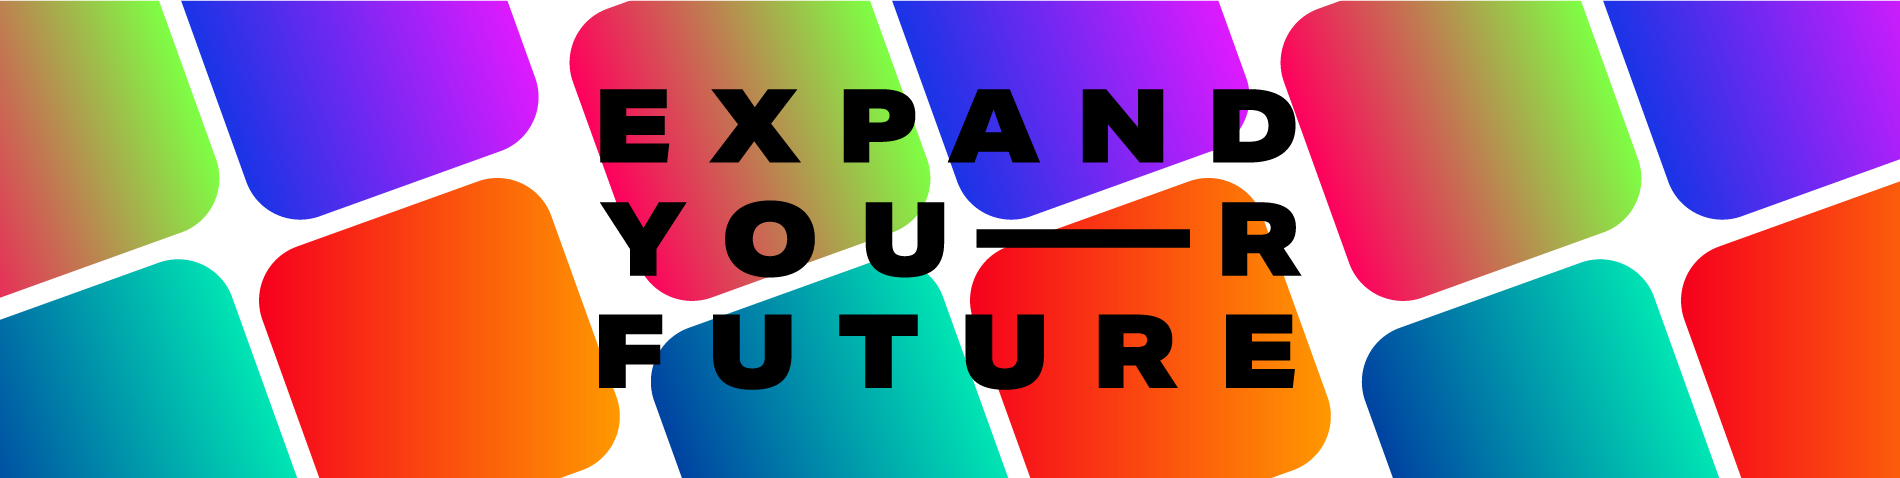 Expand Your Future Banner, Professional Masters Programs